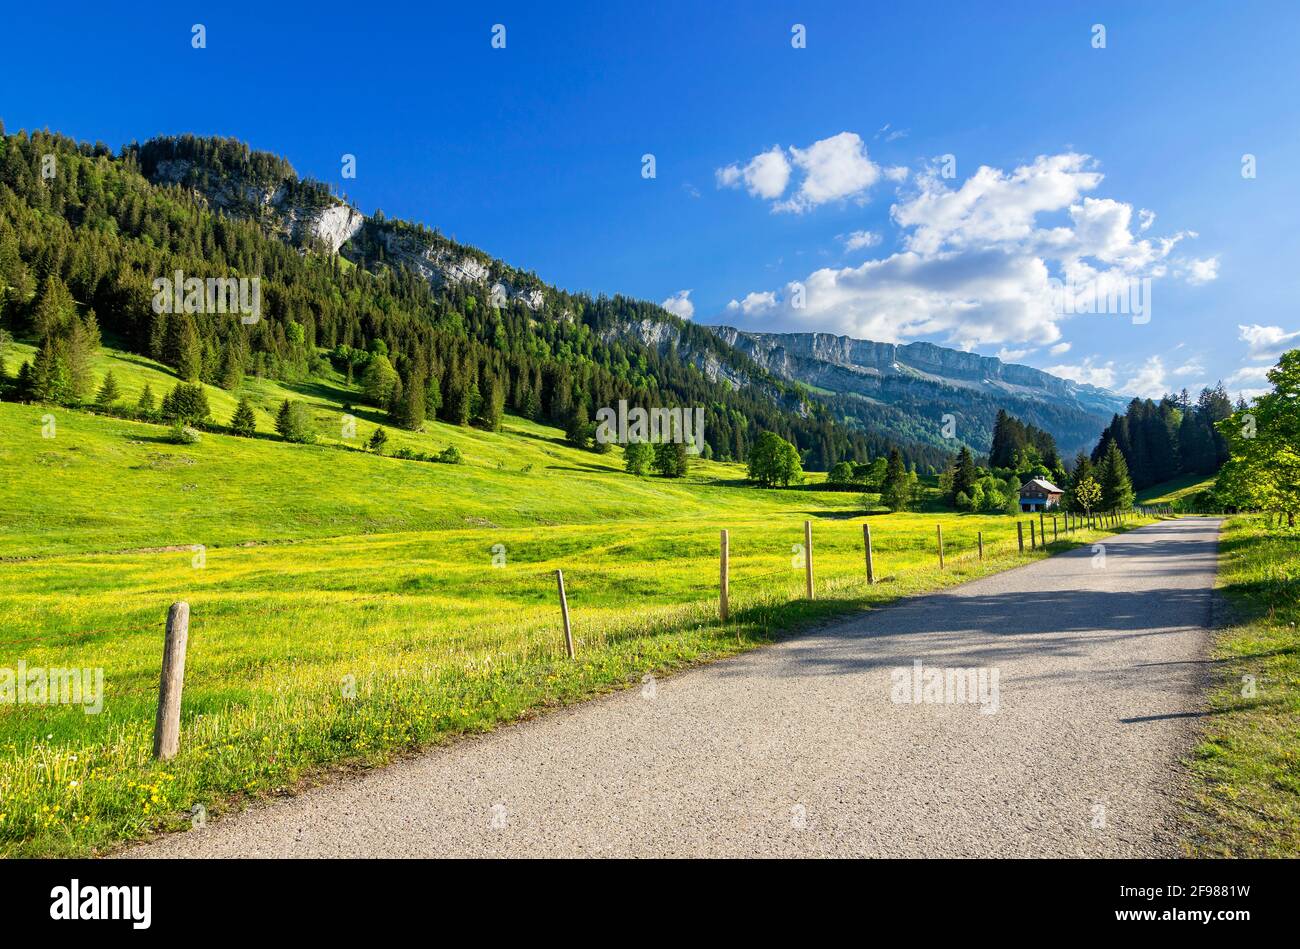 Mountain landscape in the Rohrmooser Tal near Oberstdorf. Spring meadows with yellow flowers, forest and mountains. Allgäu Alps, Bavaria, Germany Stock Photo